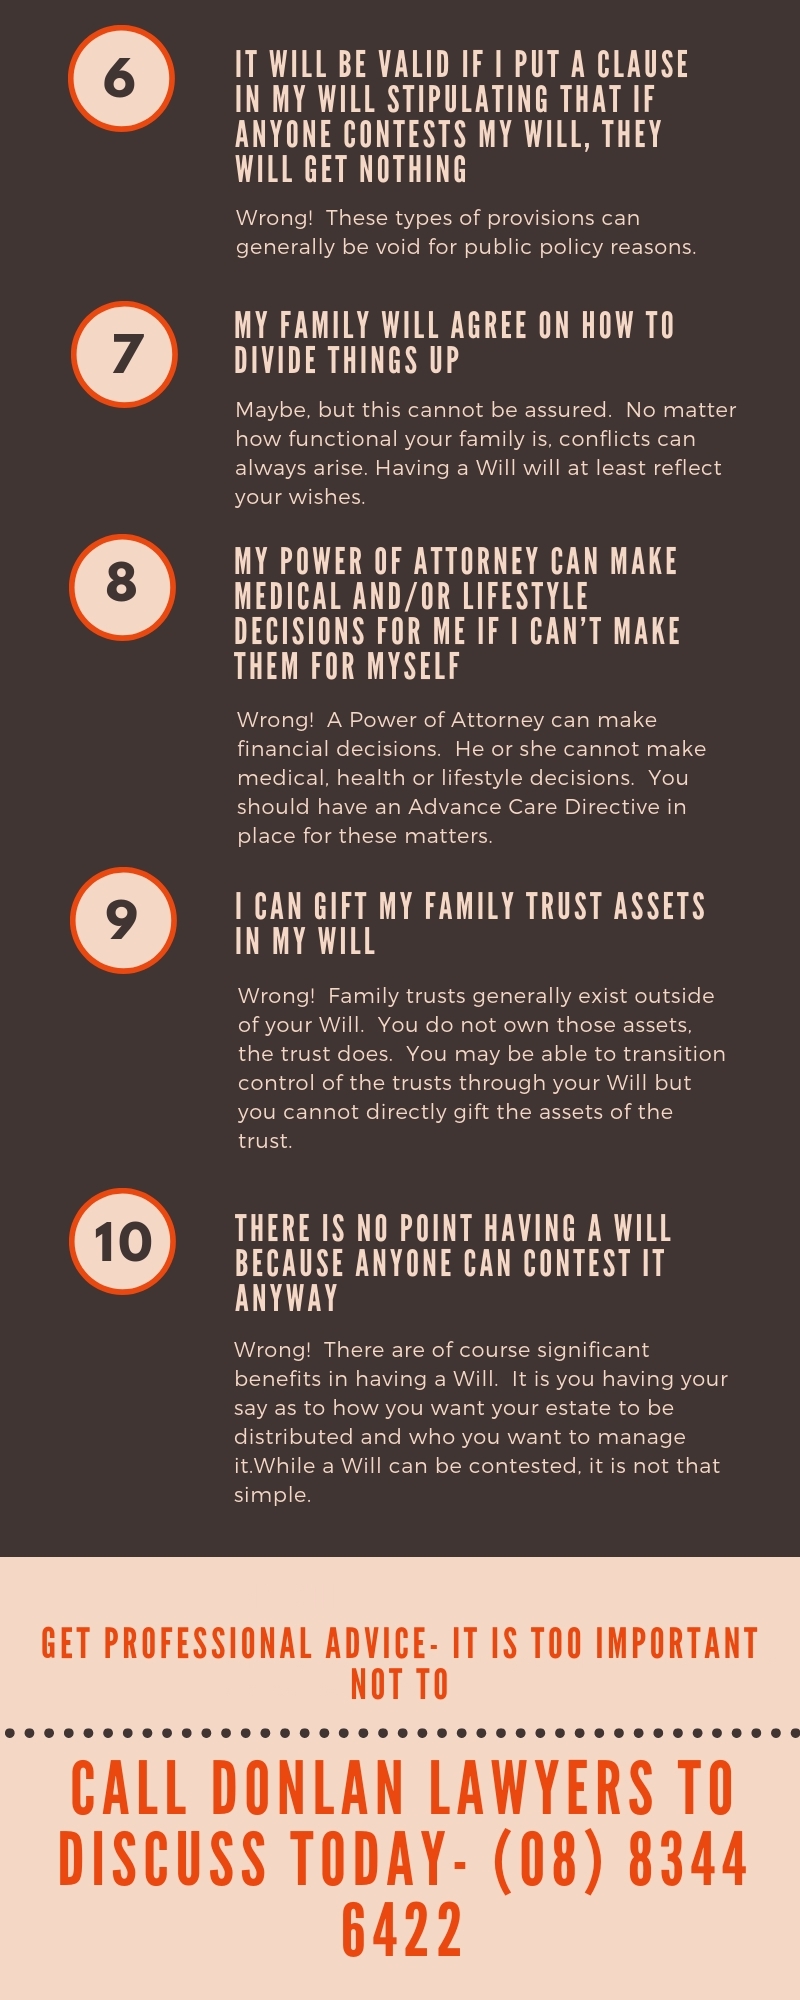 10 Common Misconceptions with Estate Planning - Image 2